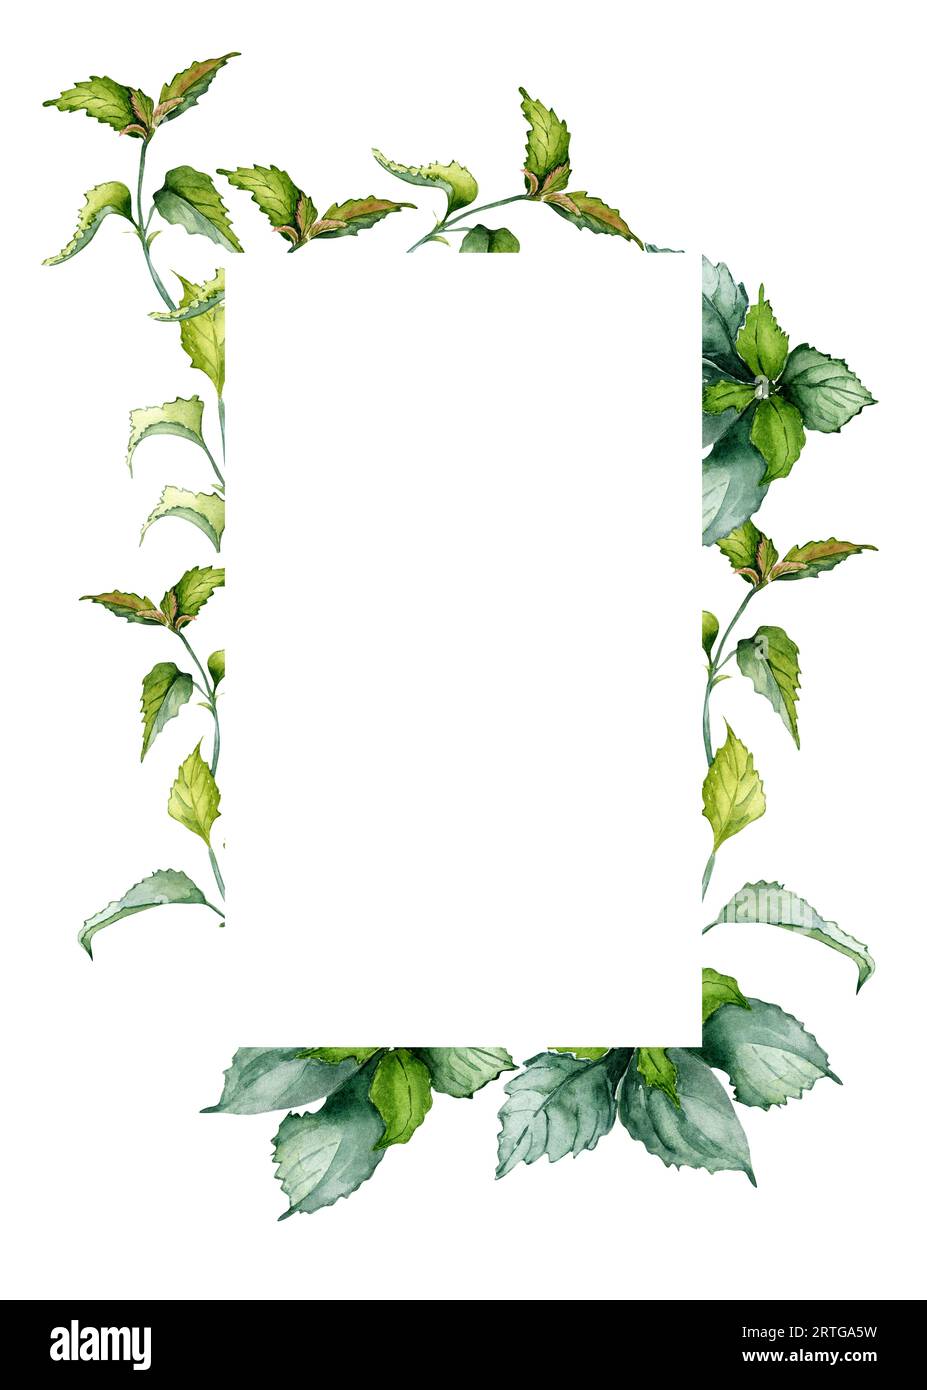 Frame of nettle stem herbal plant watercolor illustration isolated on white background. Urtica dioica, green leaves, useful herb hand drawn. Design Stock Photo